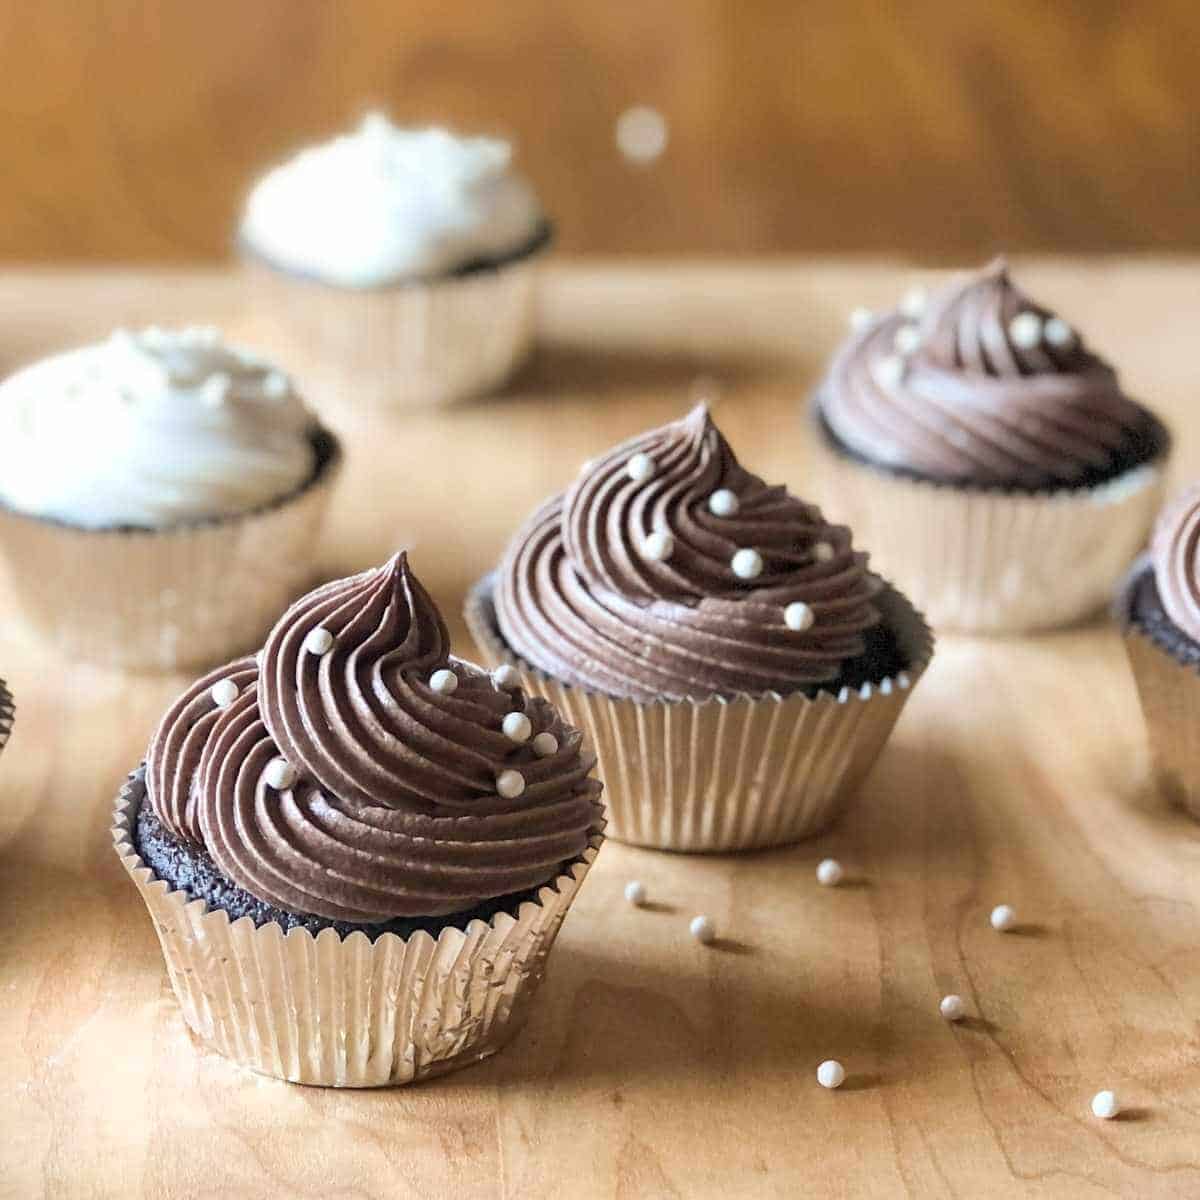 Chocolate gluten free cupcakes with chocolate frosting and white sprinkles.